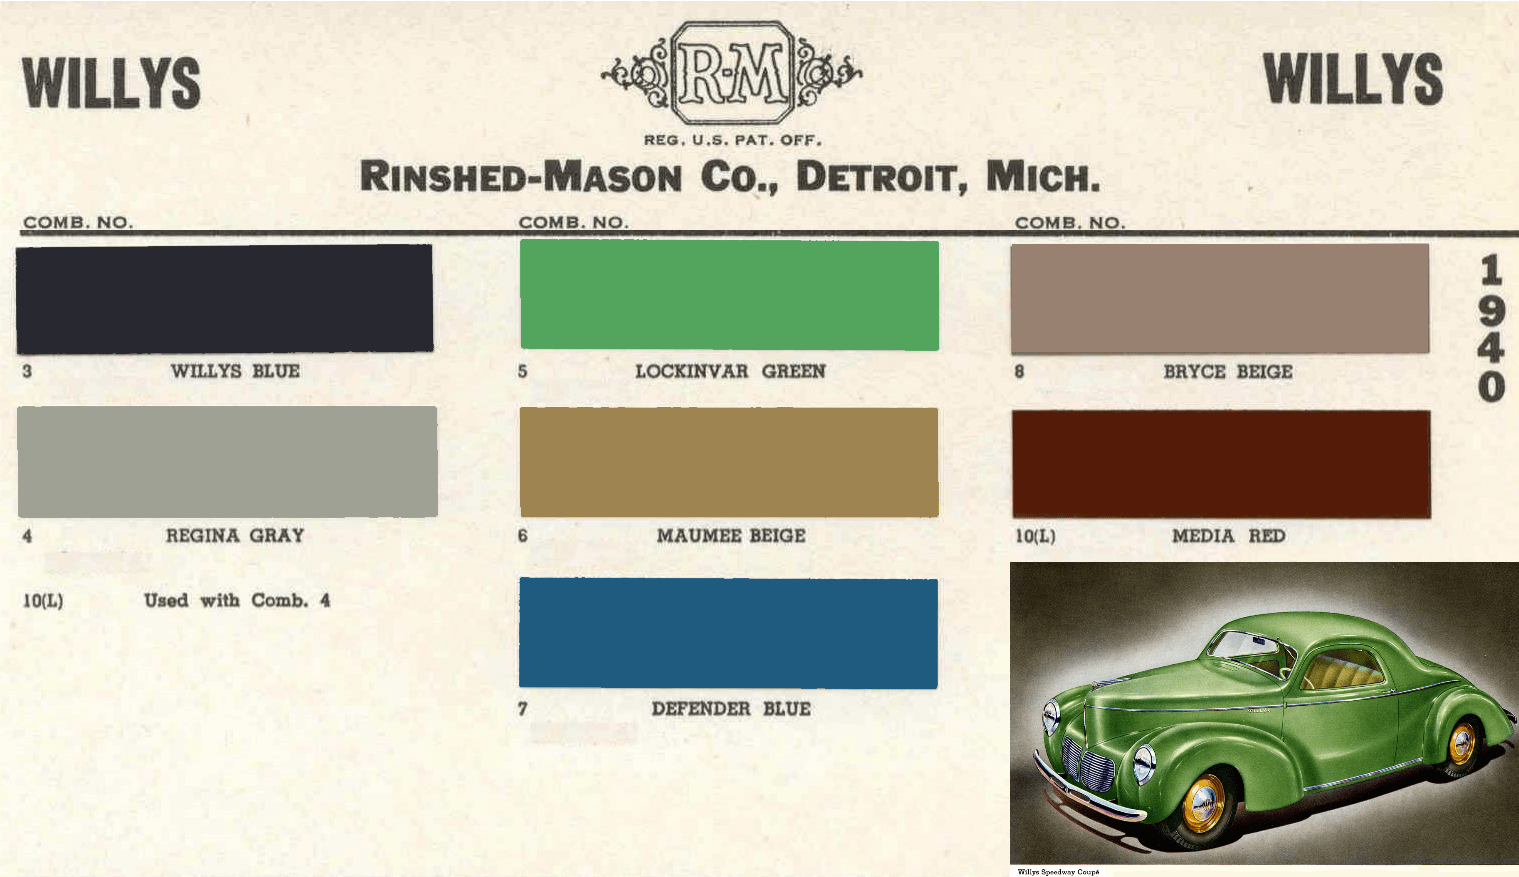 Colors and Codes used on Willys Vehicles in 1940